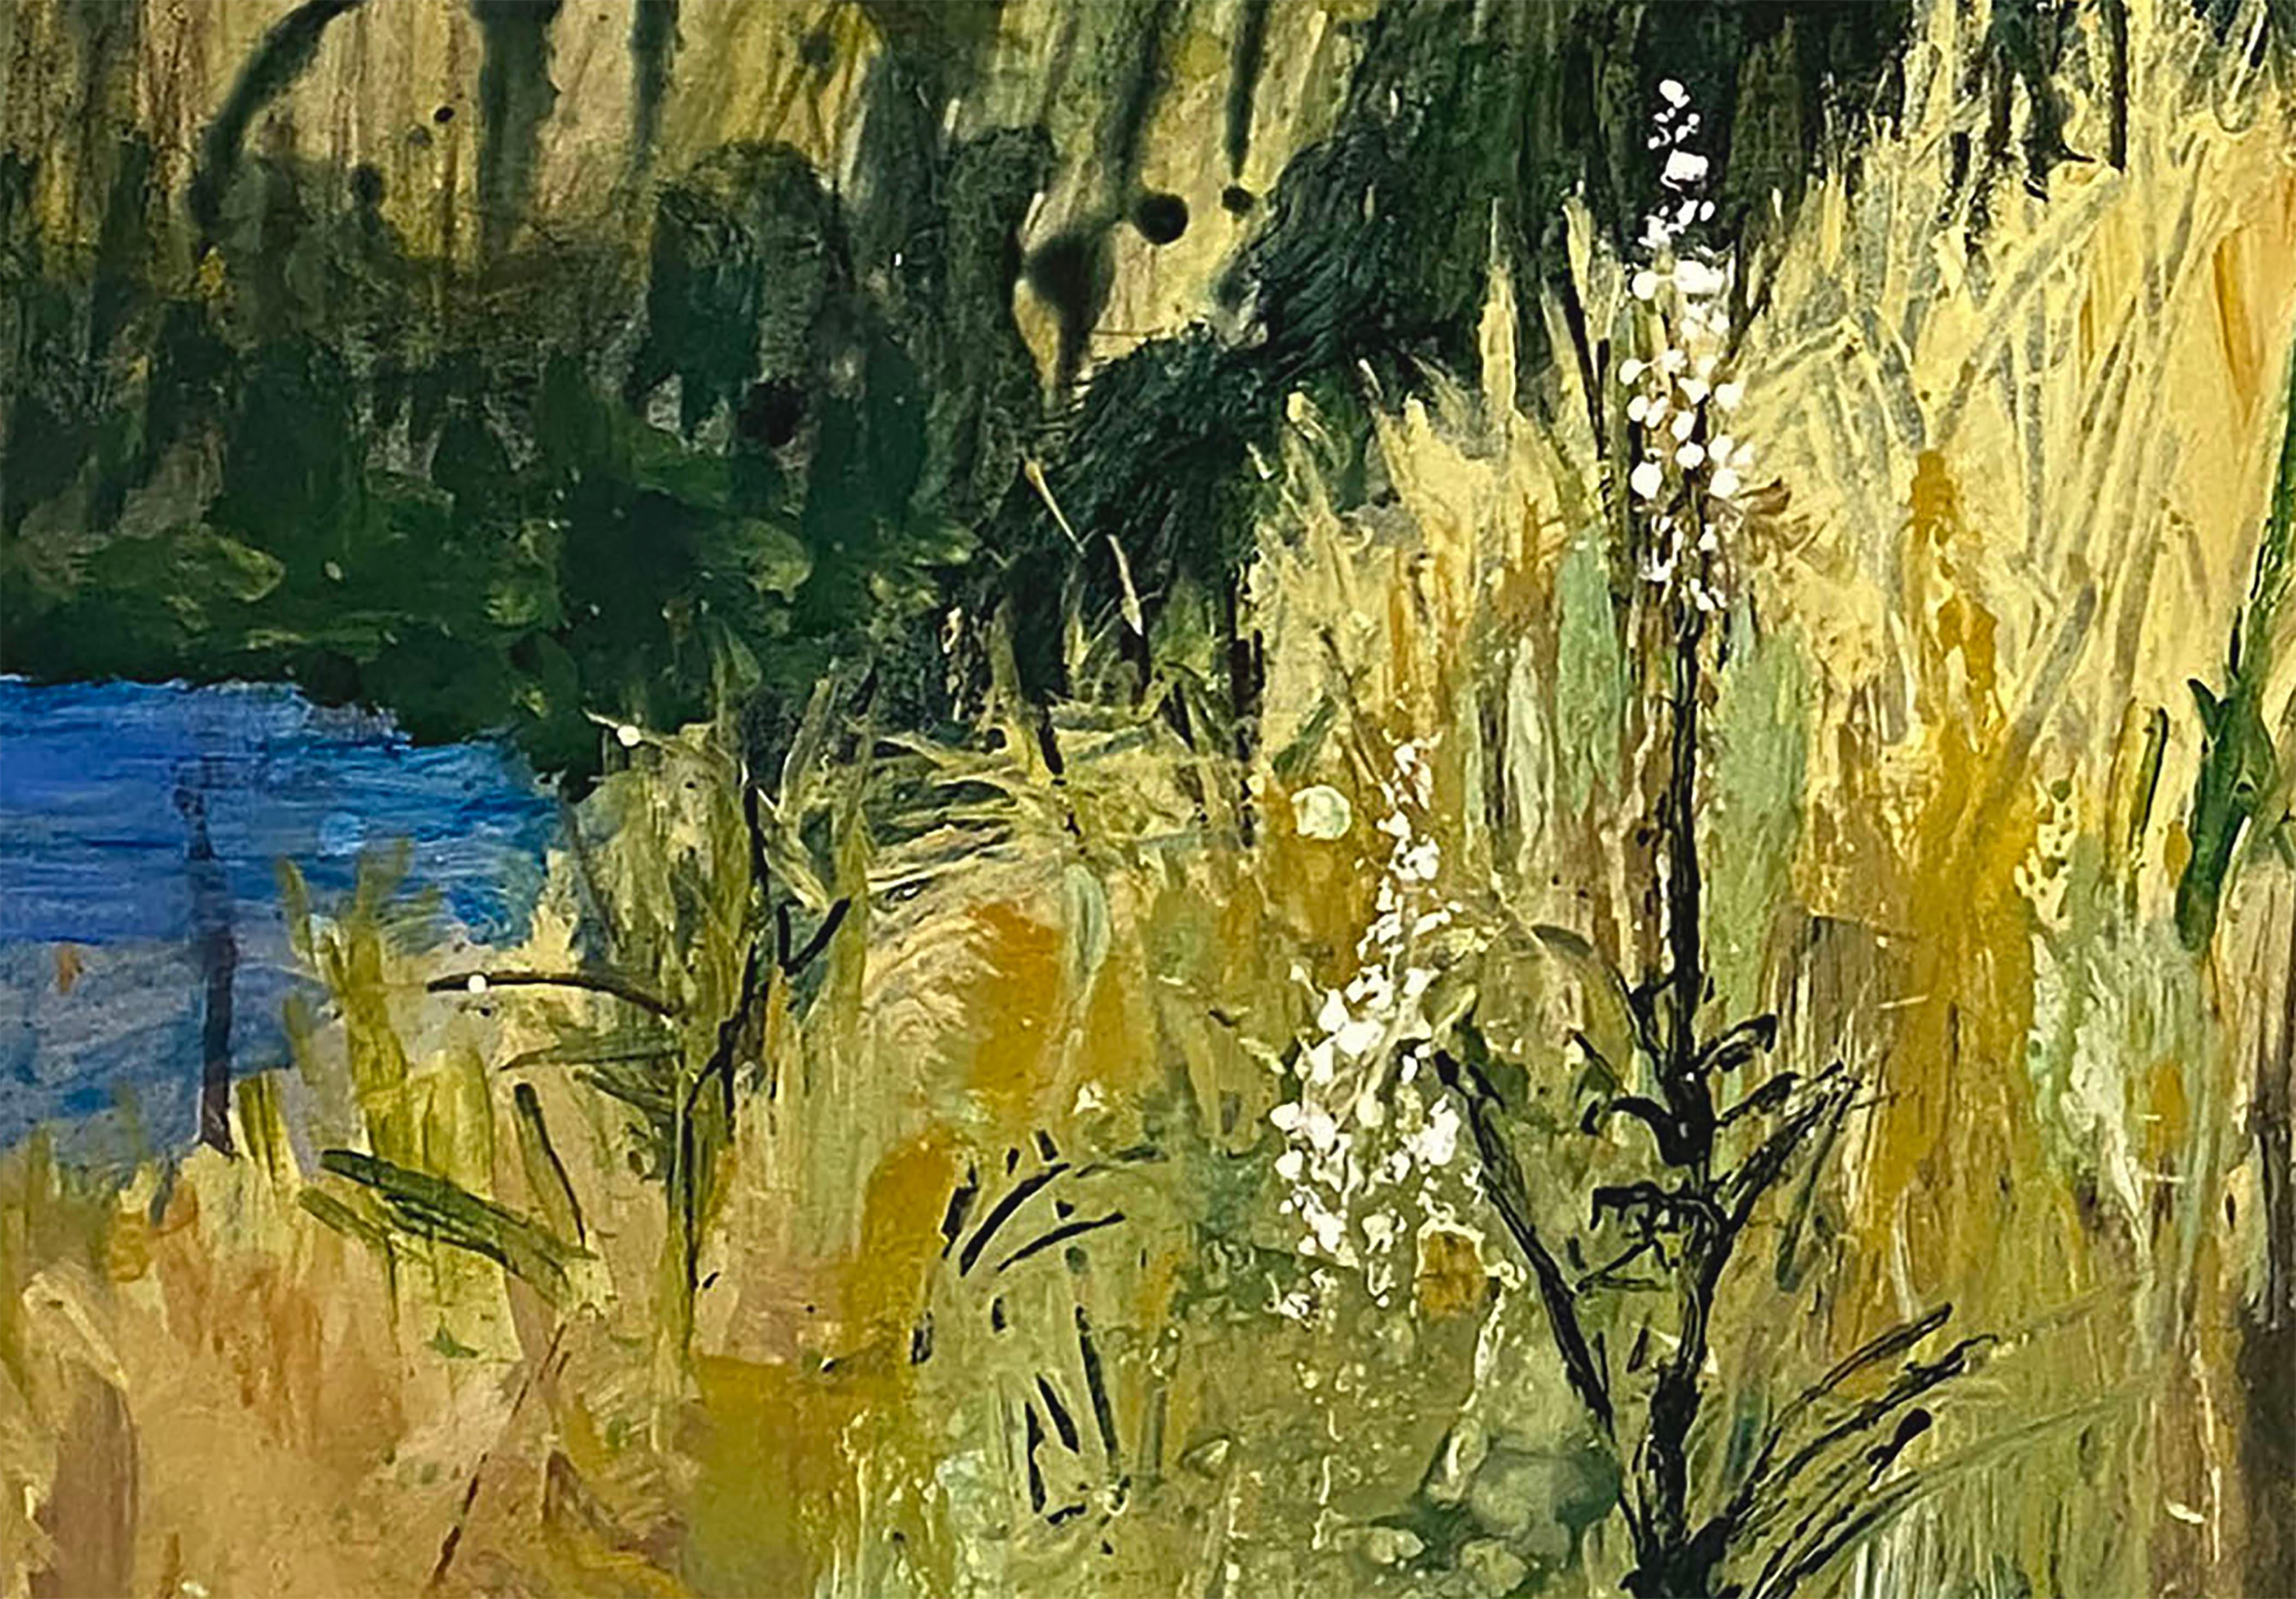 Descent (abstract, mtn hillside, lake, forest, wildflowers, green, gold, red) - Painting by Allison Stewart